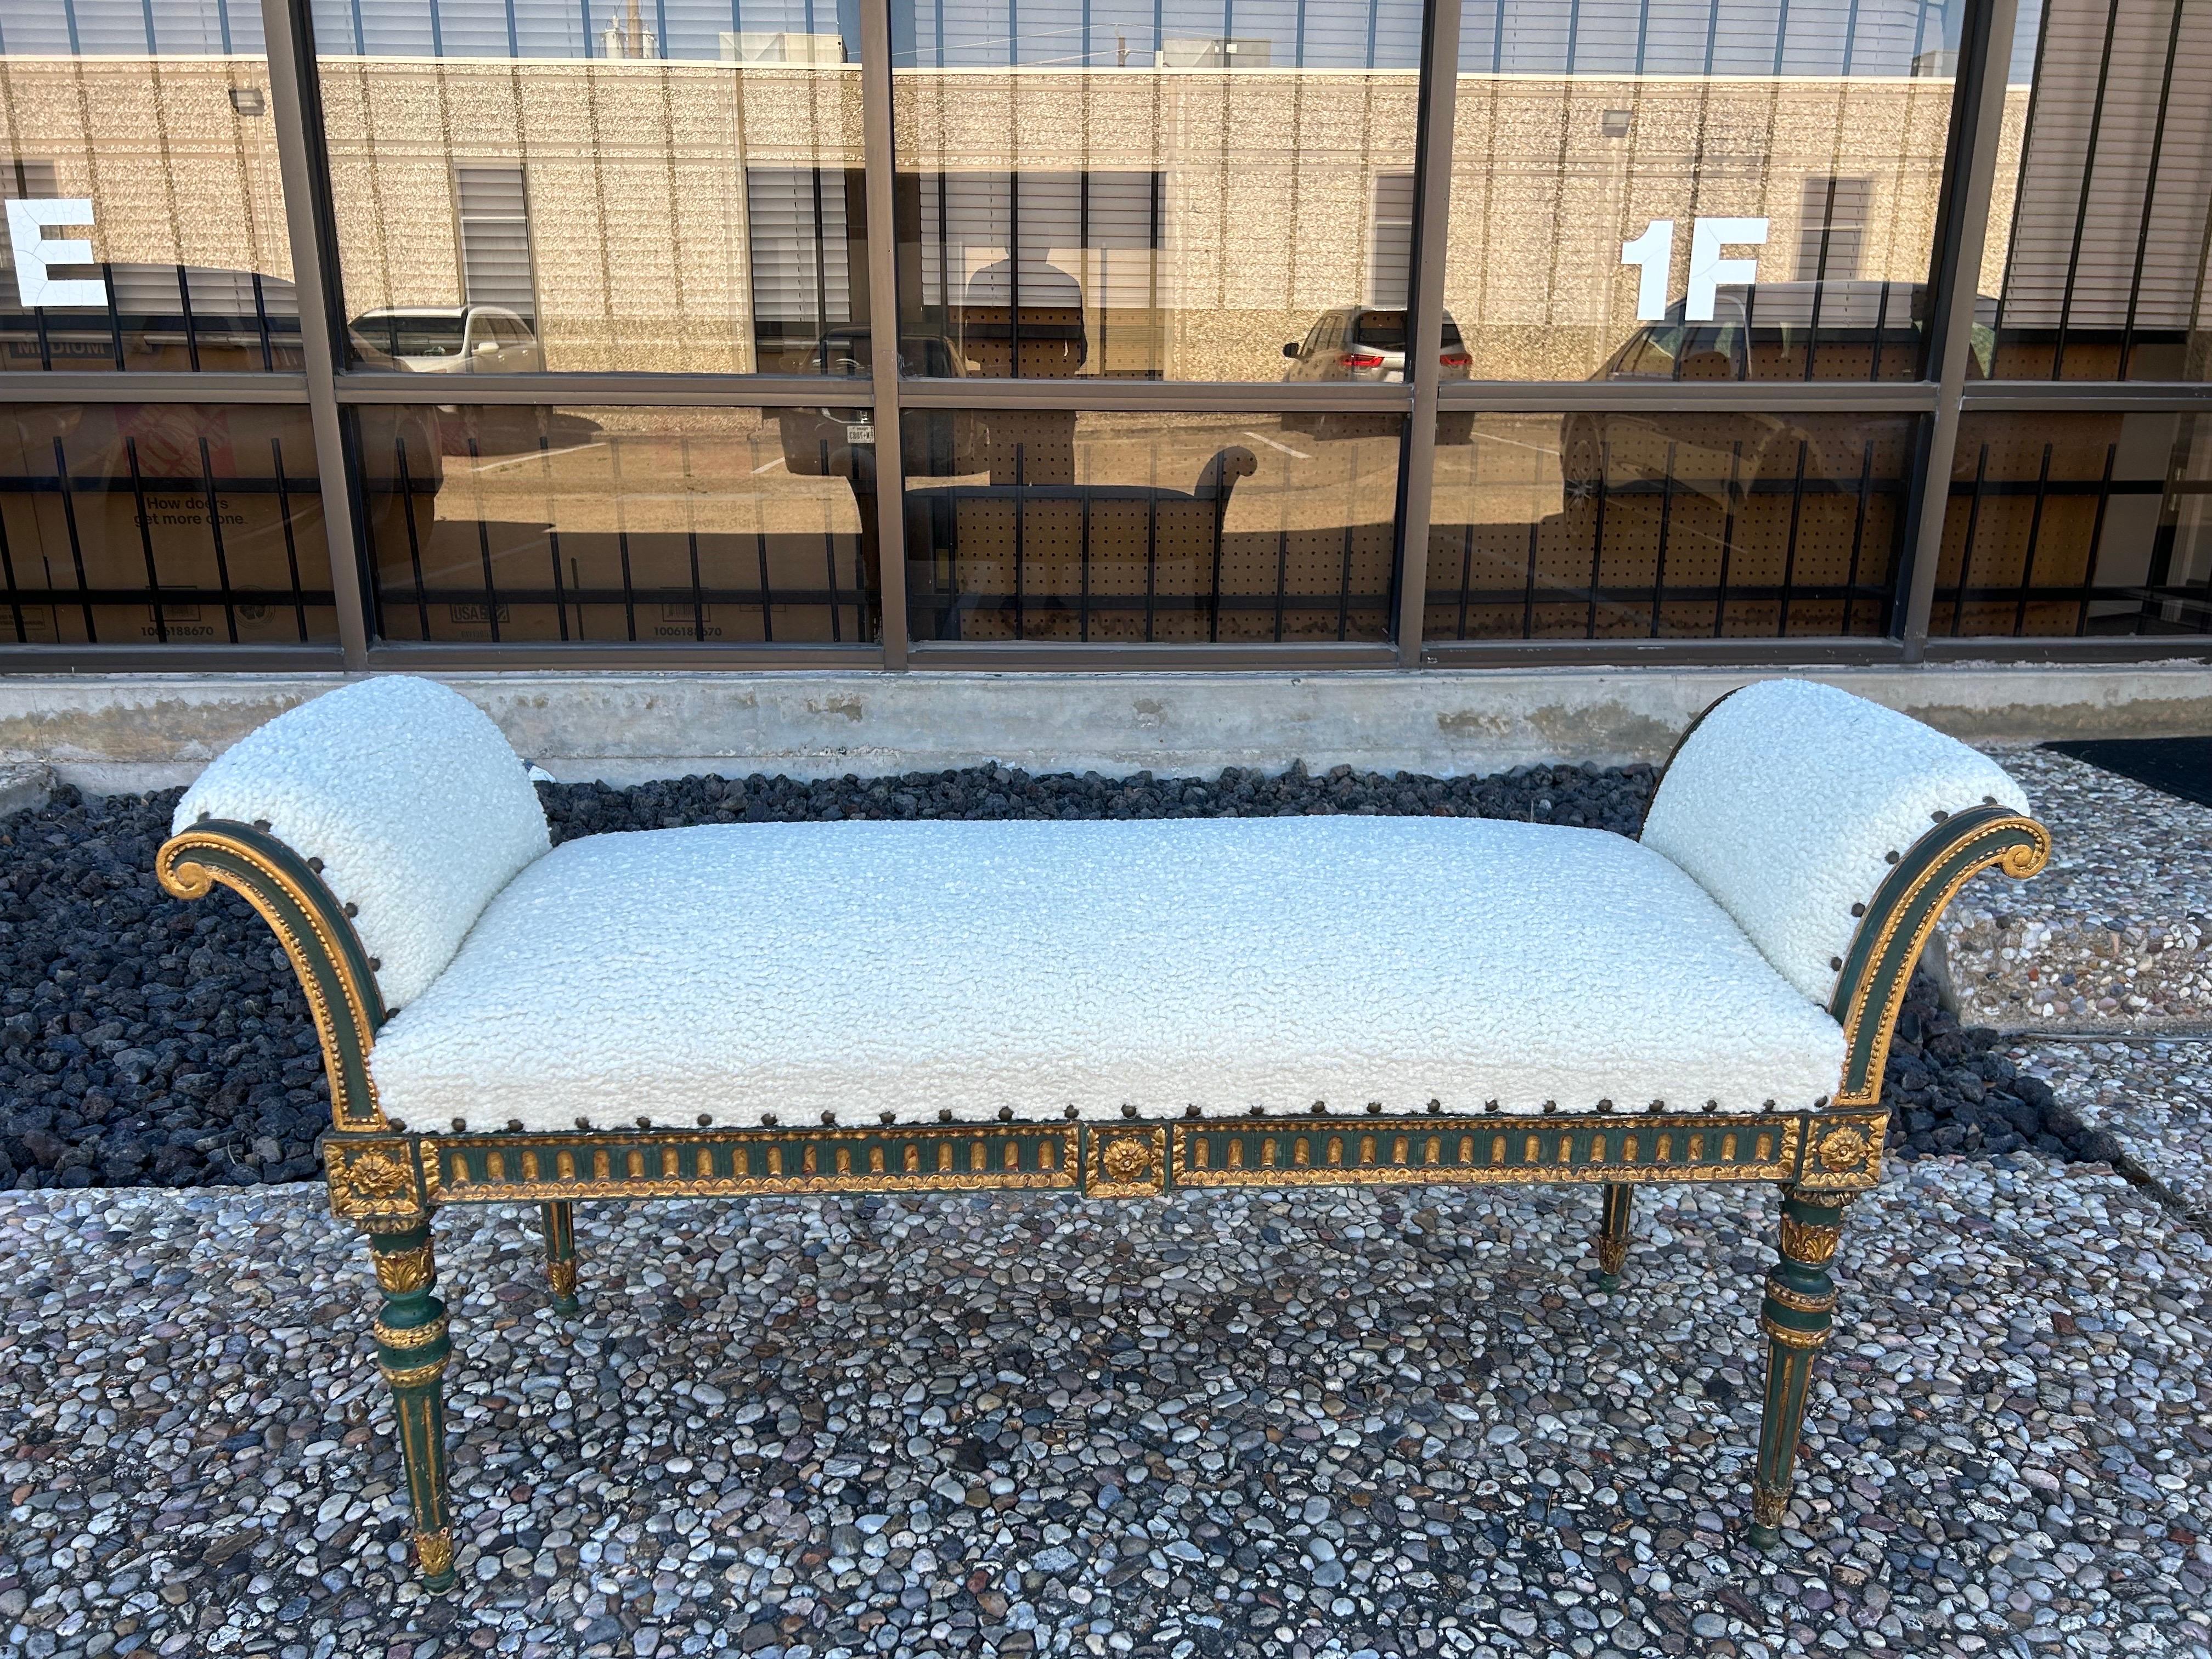 19th Century Italian Painted And Parcel Gilt Bench.
This stunning antique Italian Louis XVI style painted and giltwood bench or window seat is versatile enough to use in a living area, entrance hall or at the foot of a bed.
Newly upholstered in